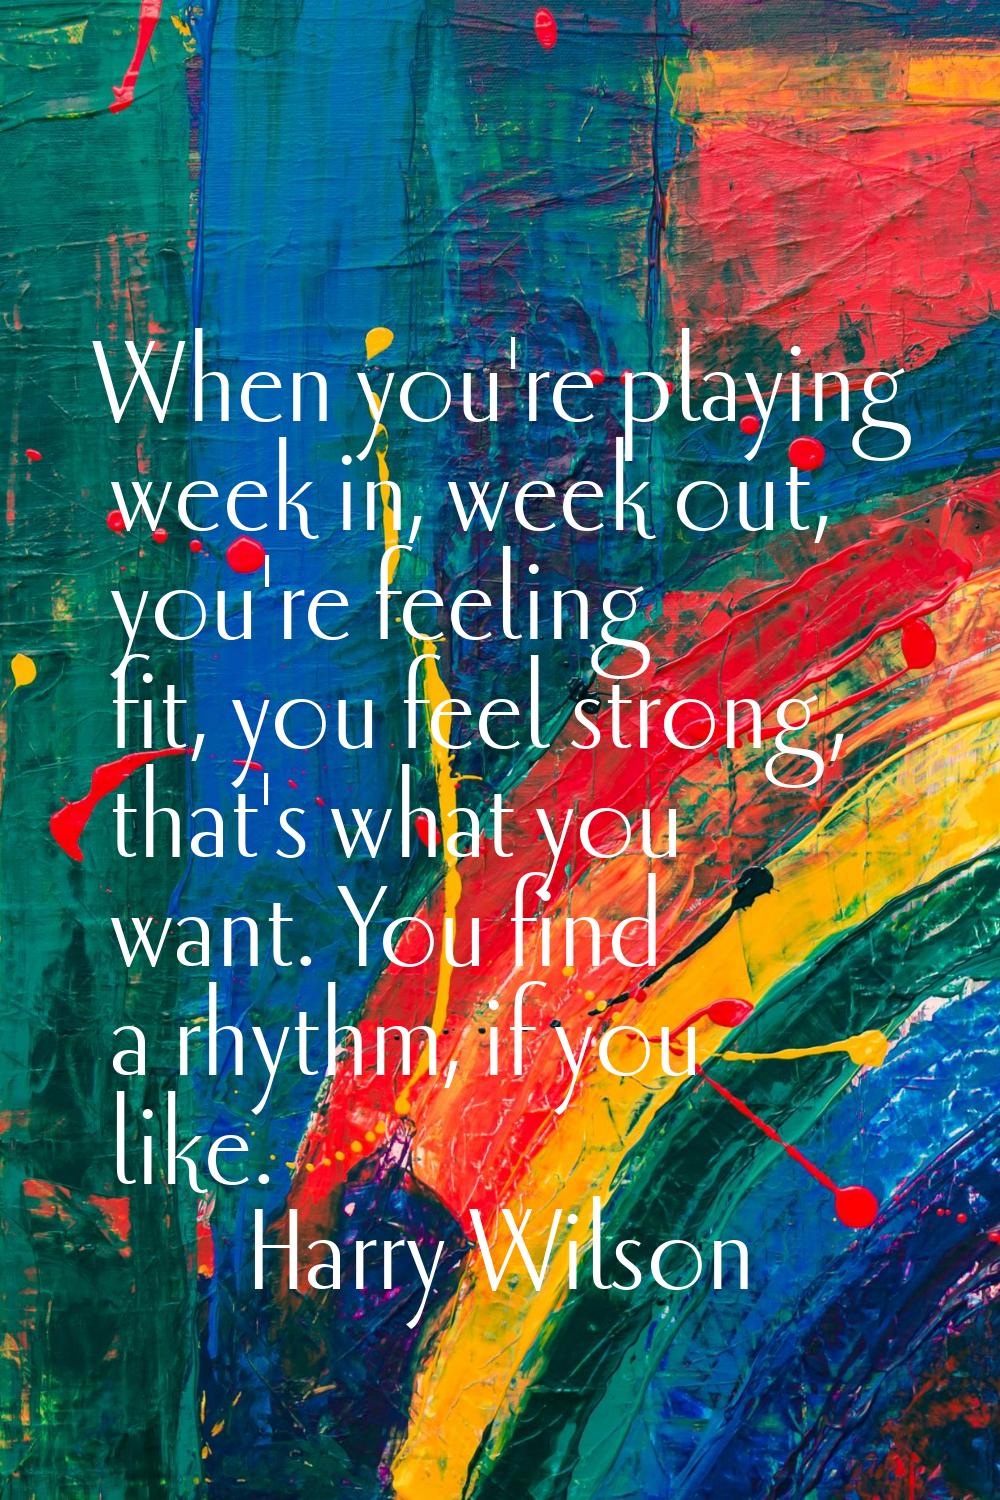 When you're playing week in, week out, you're feeling fit, you feel strong, that's what you want. Y